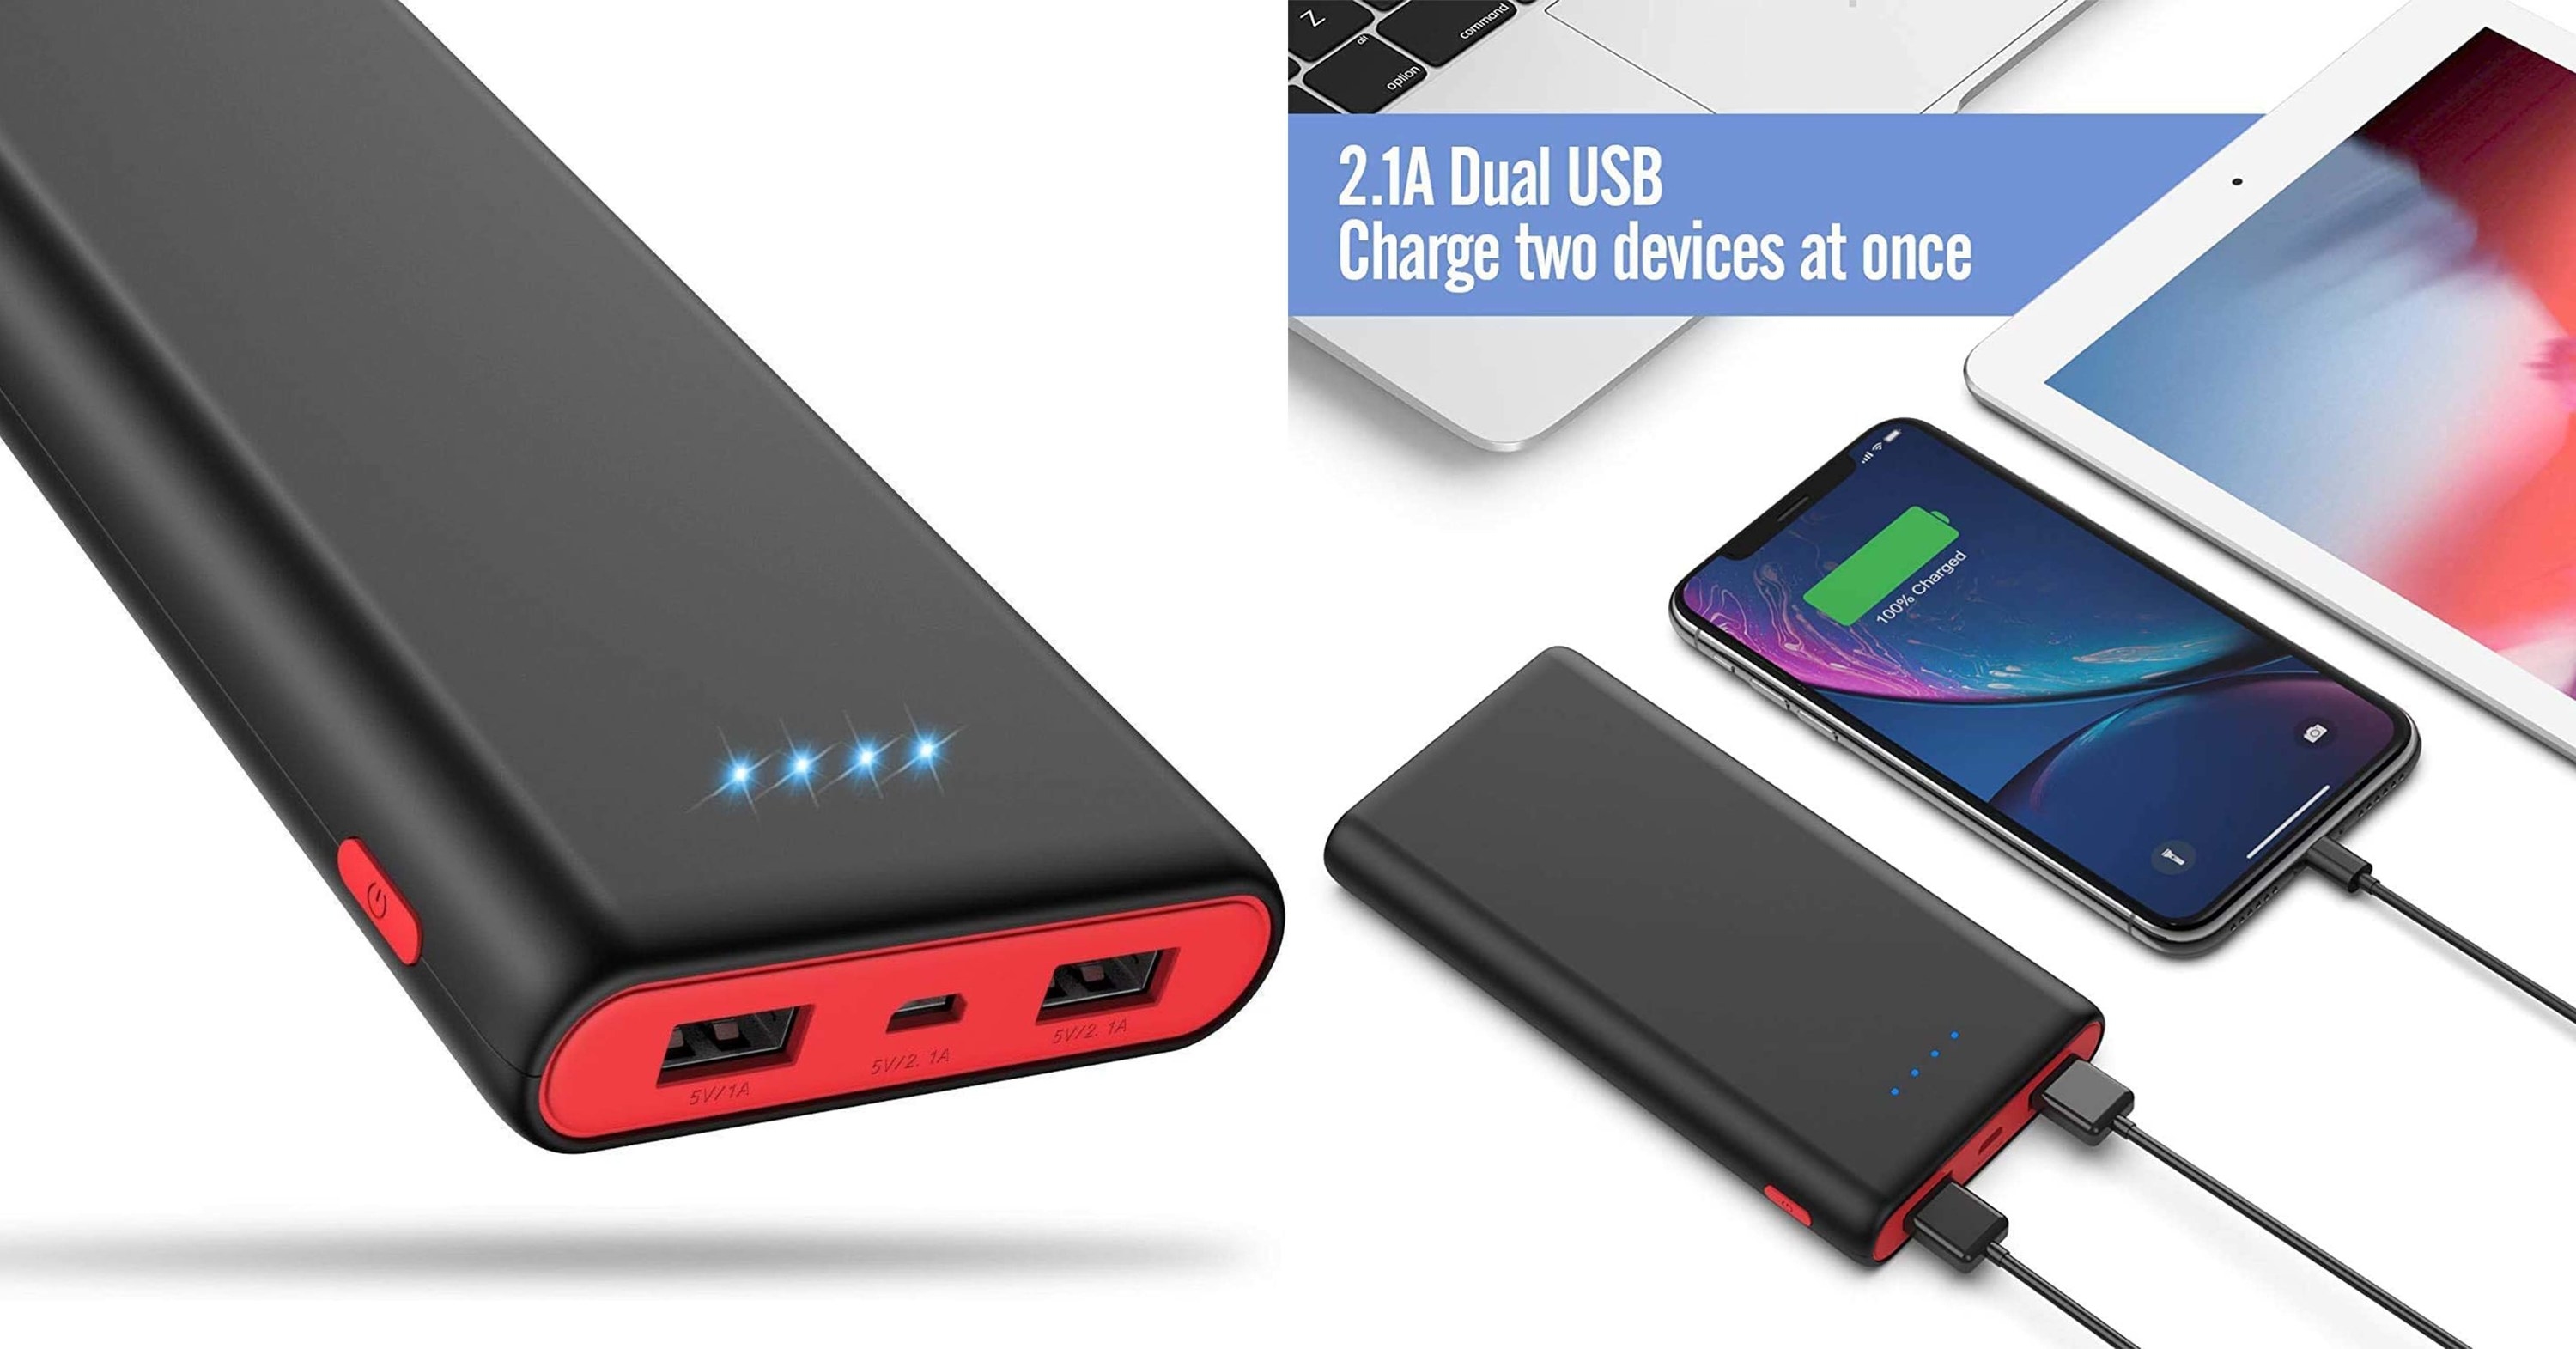 Split image of black charger with red accents and four lights next to an example of the devices it can charge simultaneously